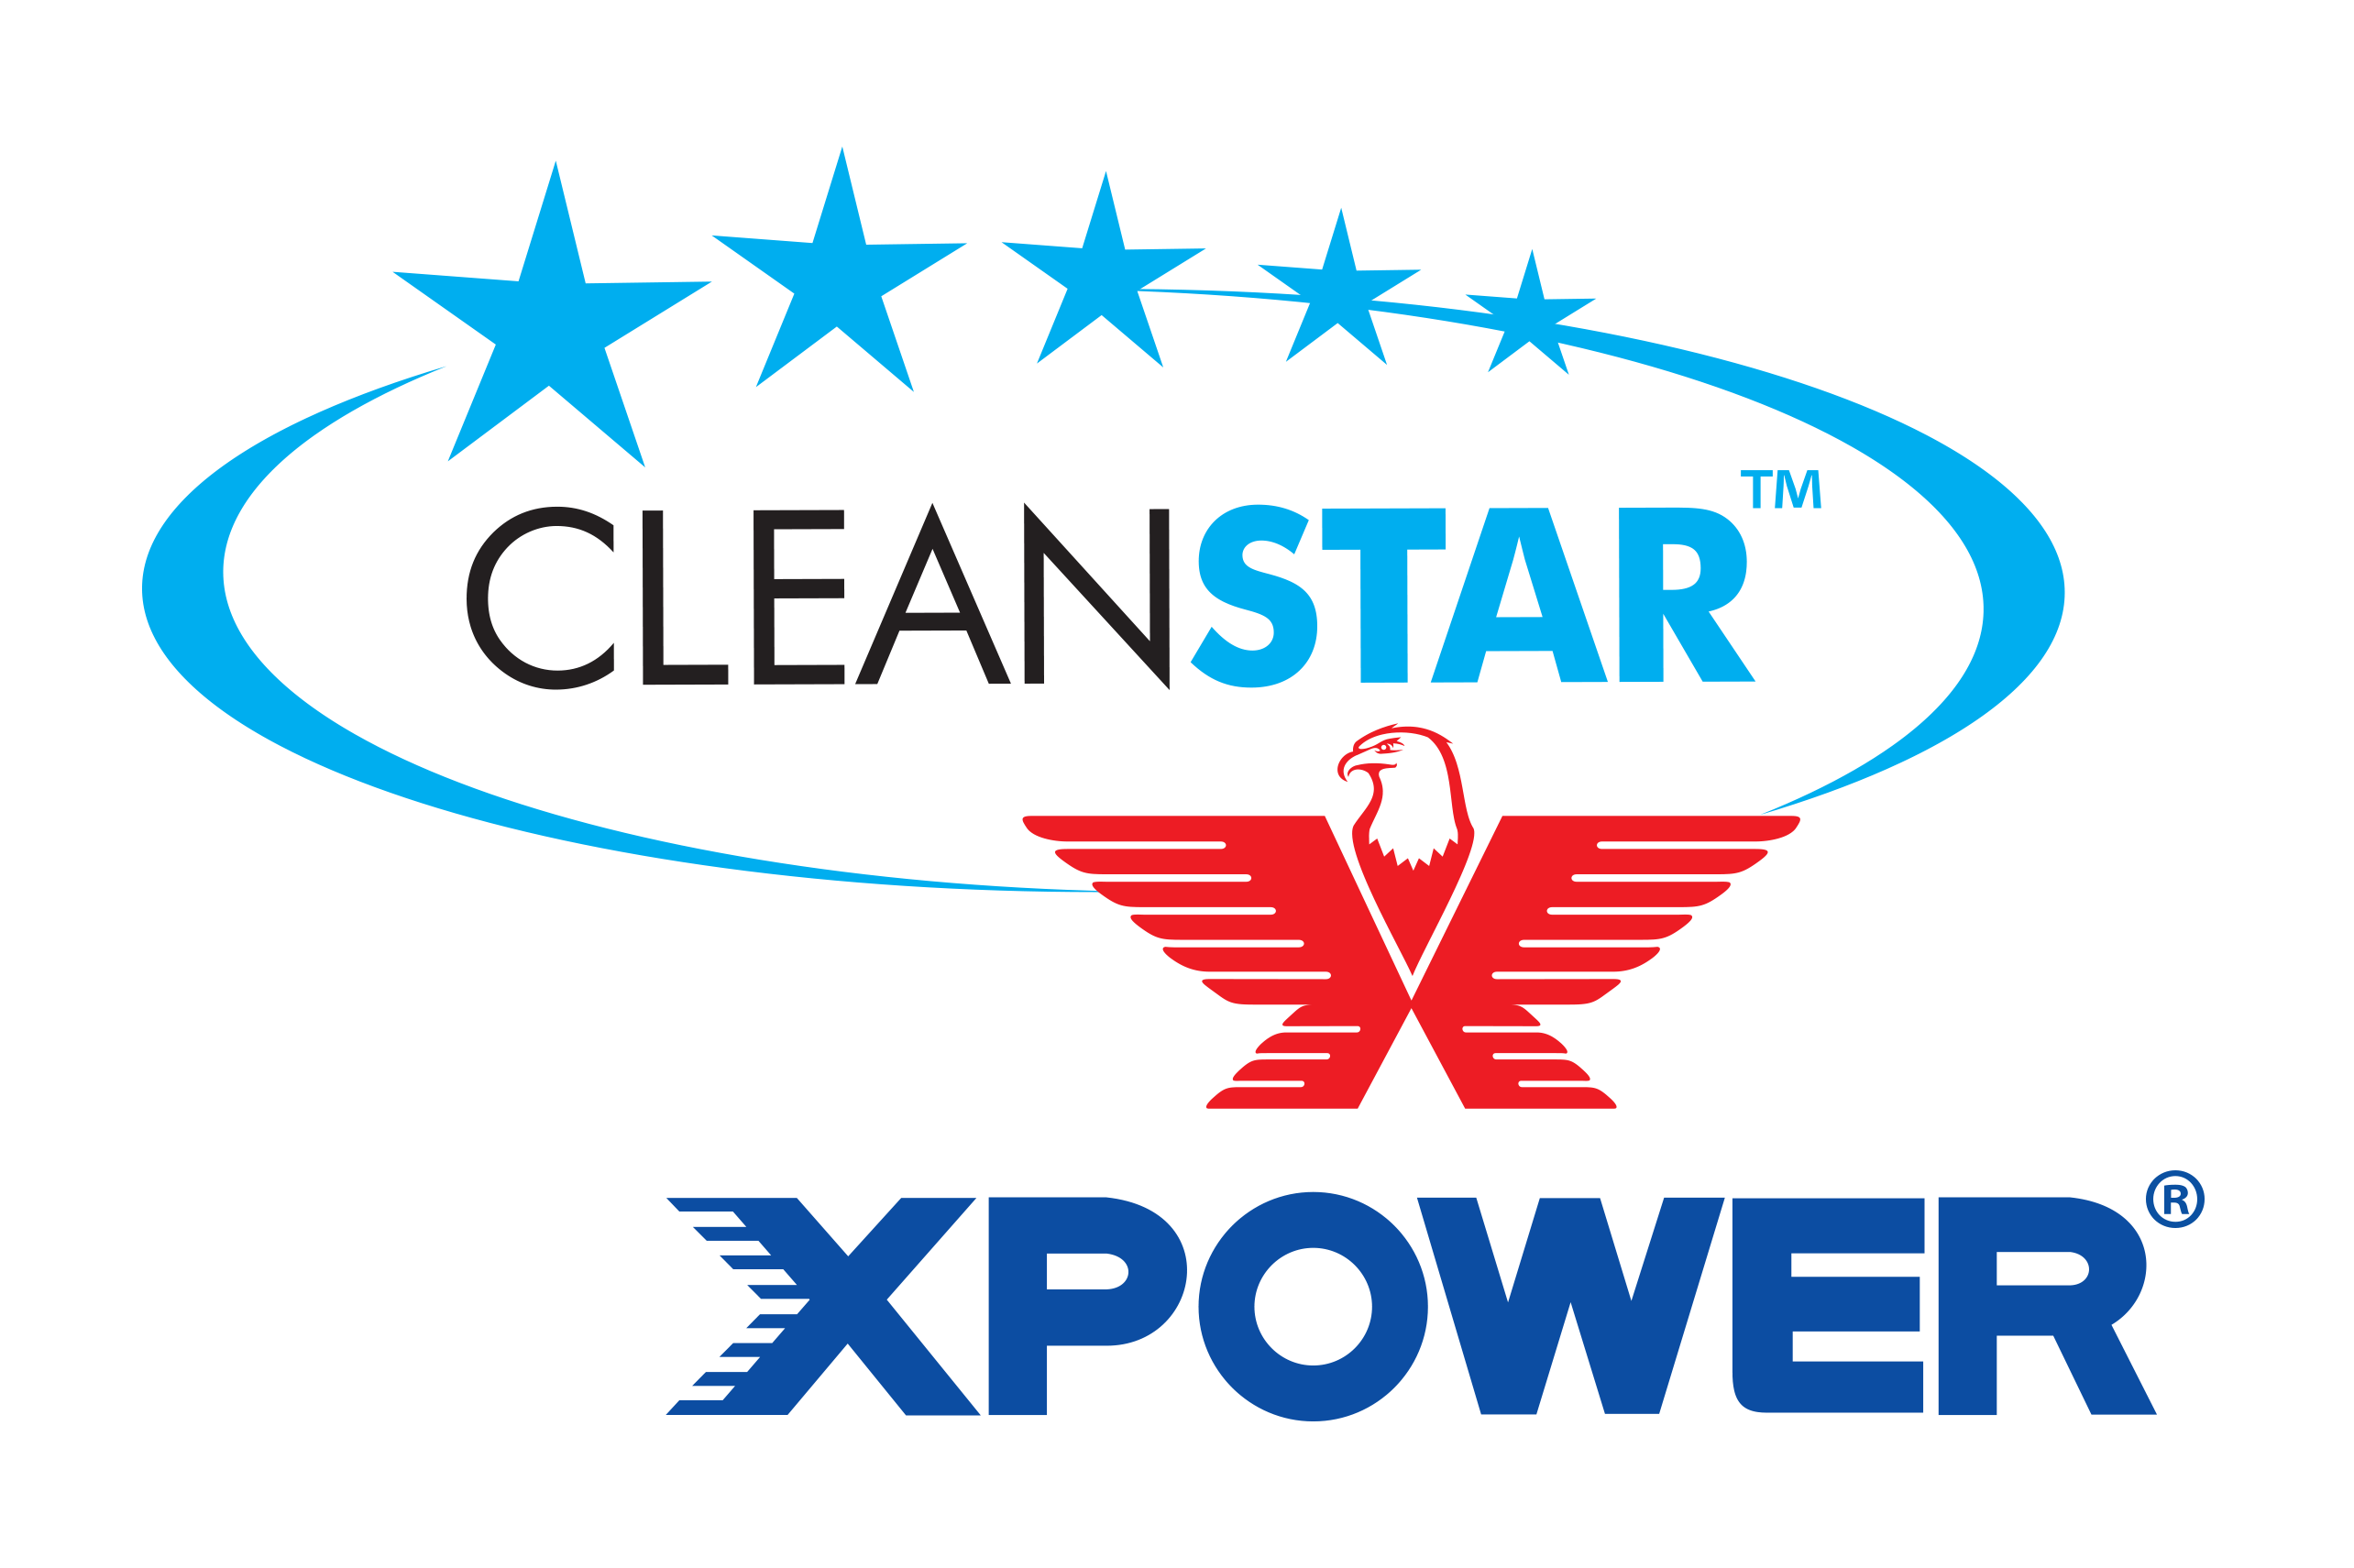 Cleanstar XPOWER